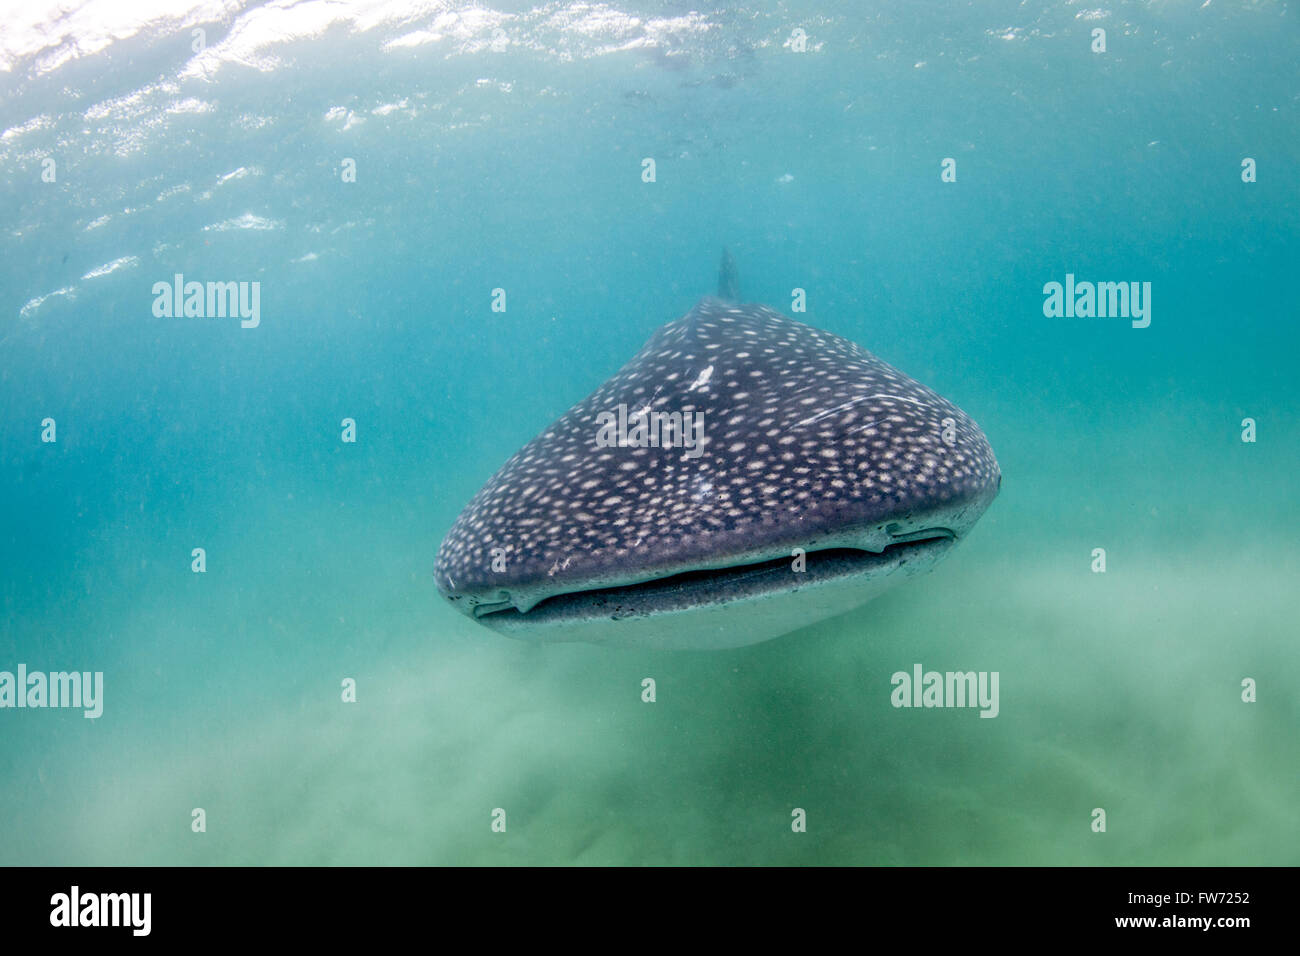 A whale shark peacefully approaching Stock Photo